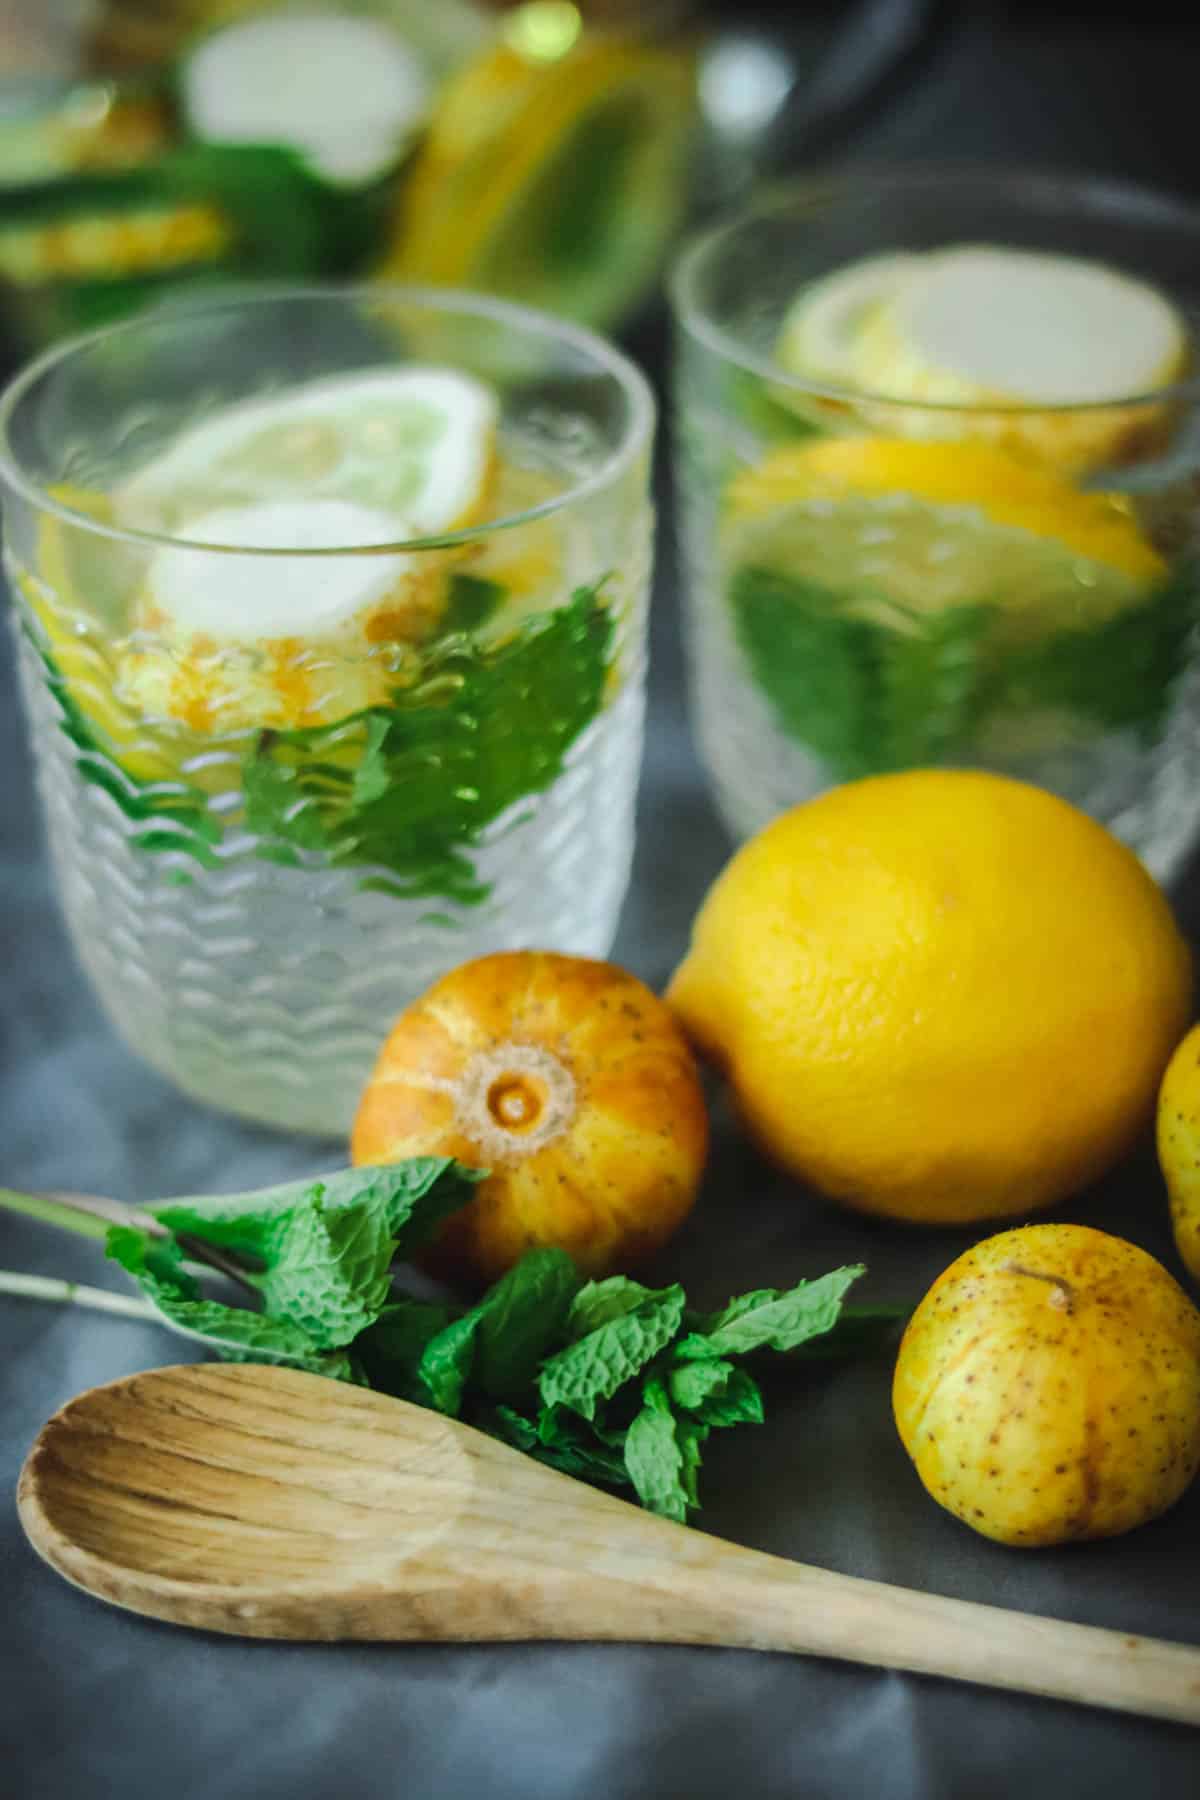 Glasses of lemon cucumber water with mint leaves and a wooden spoon.